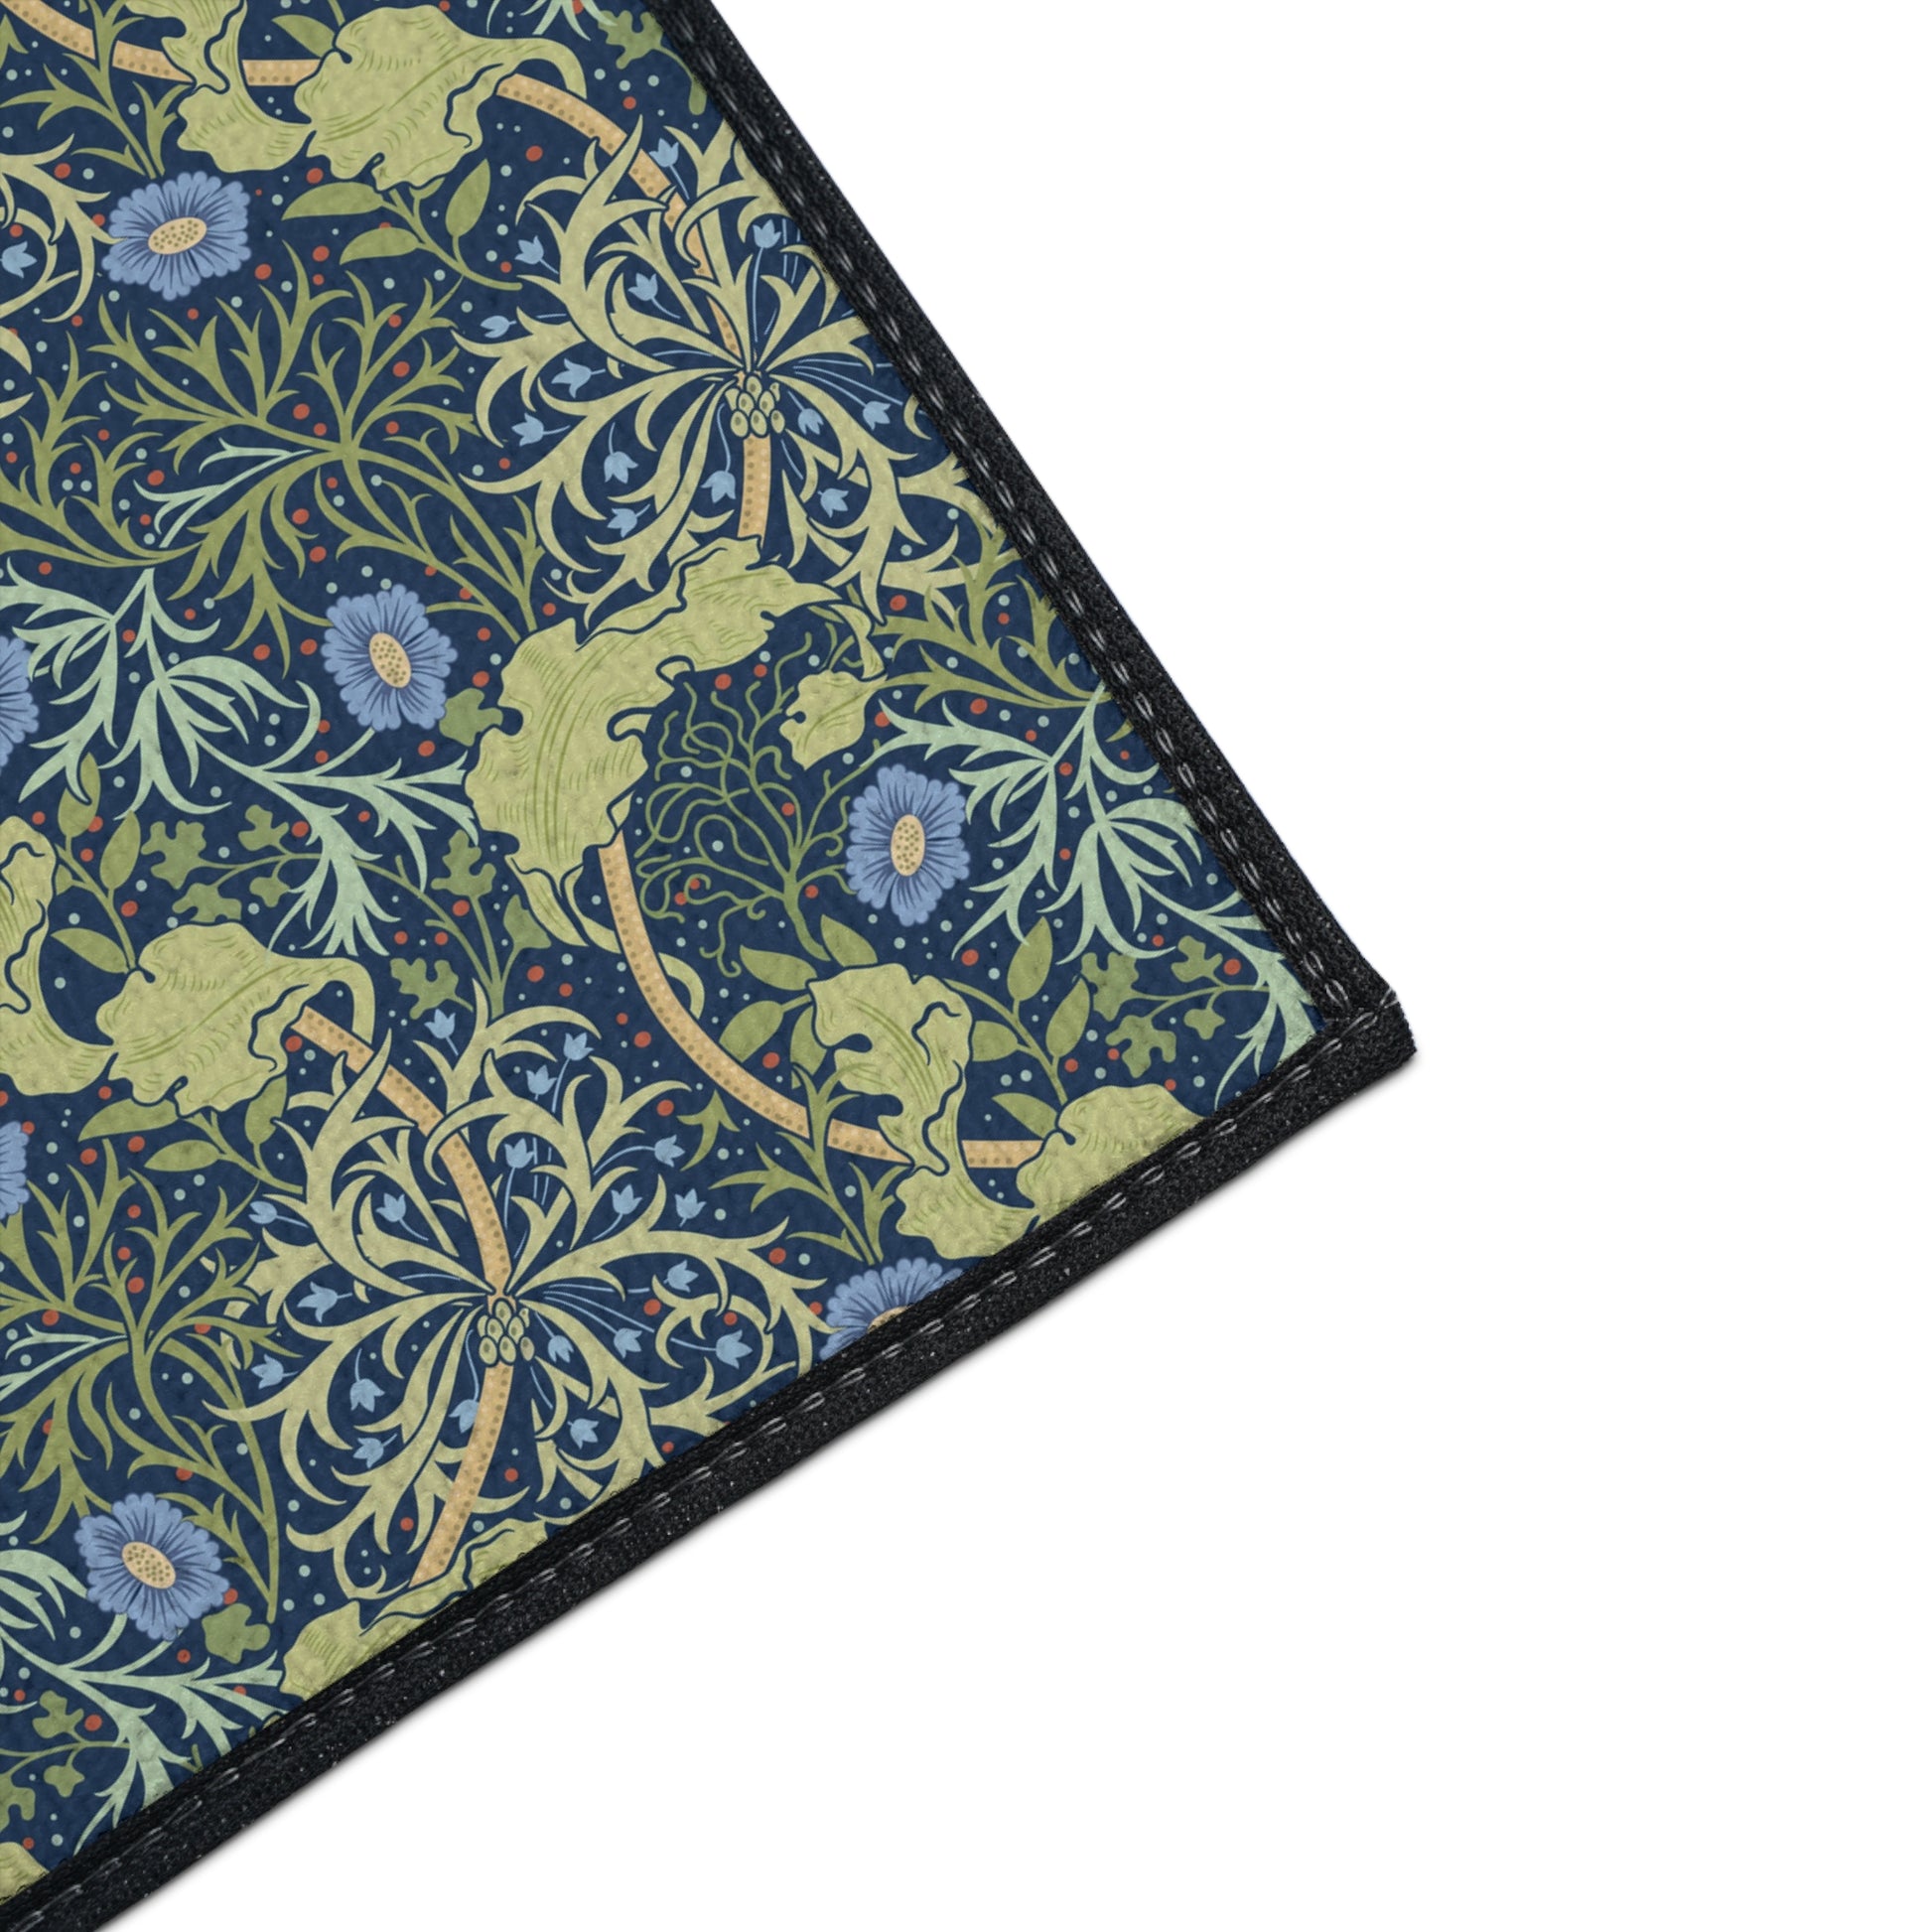 william-morris-co-heavy-duty-floor-mat-seaweed-collection-blue-flowers-14